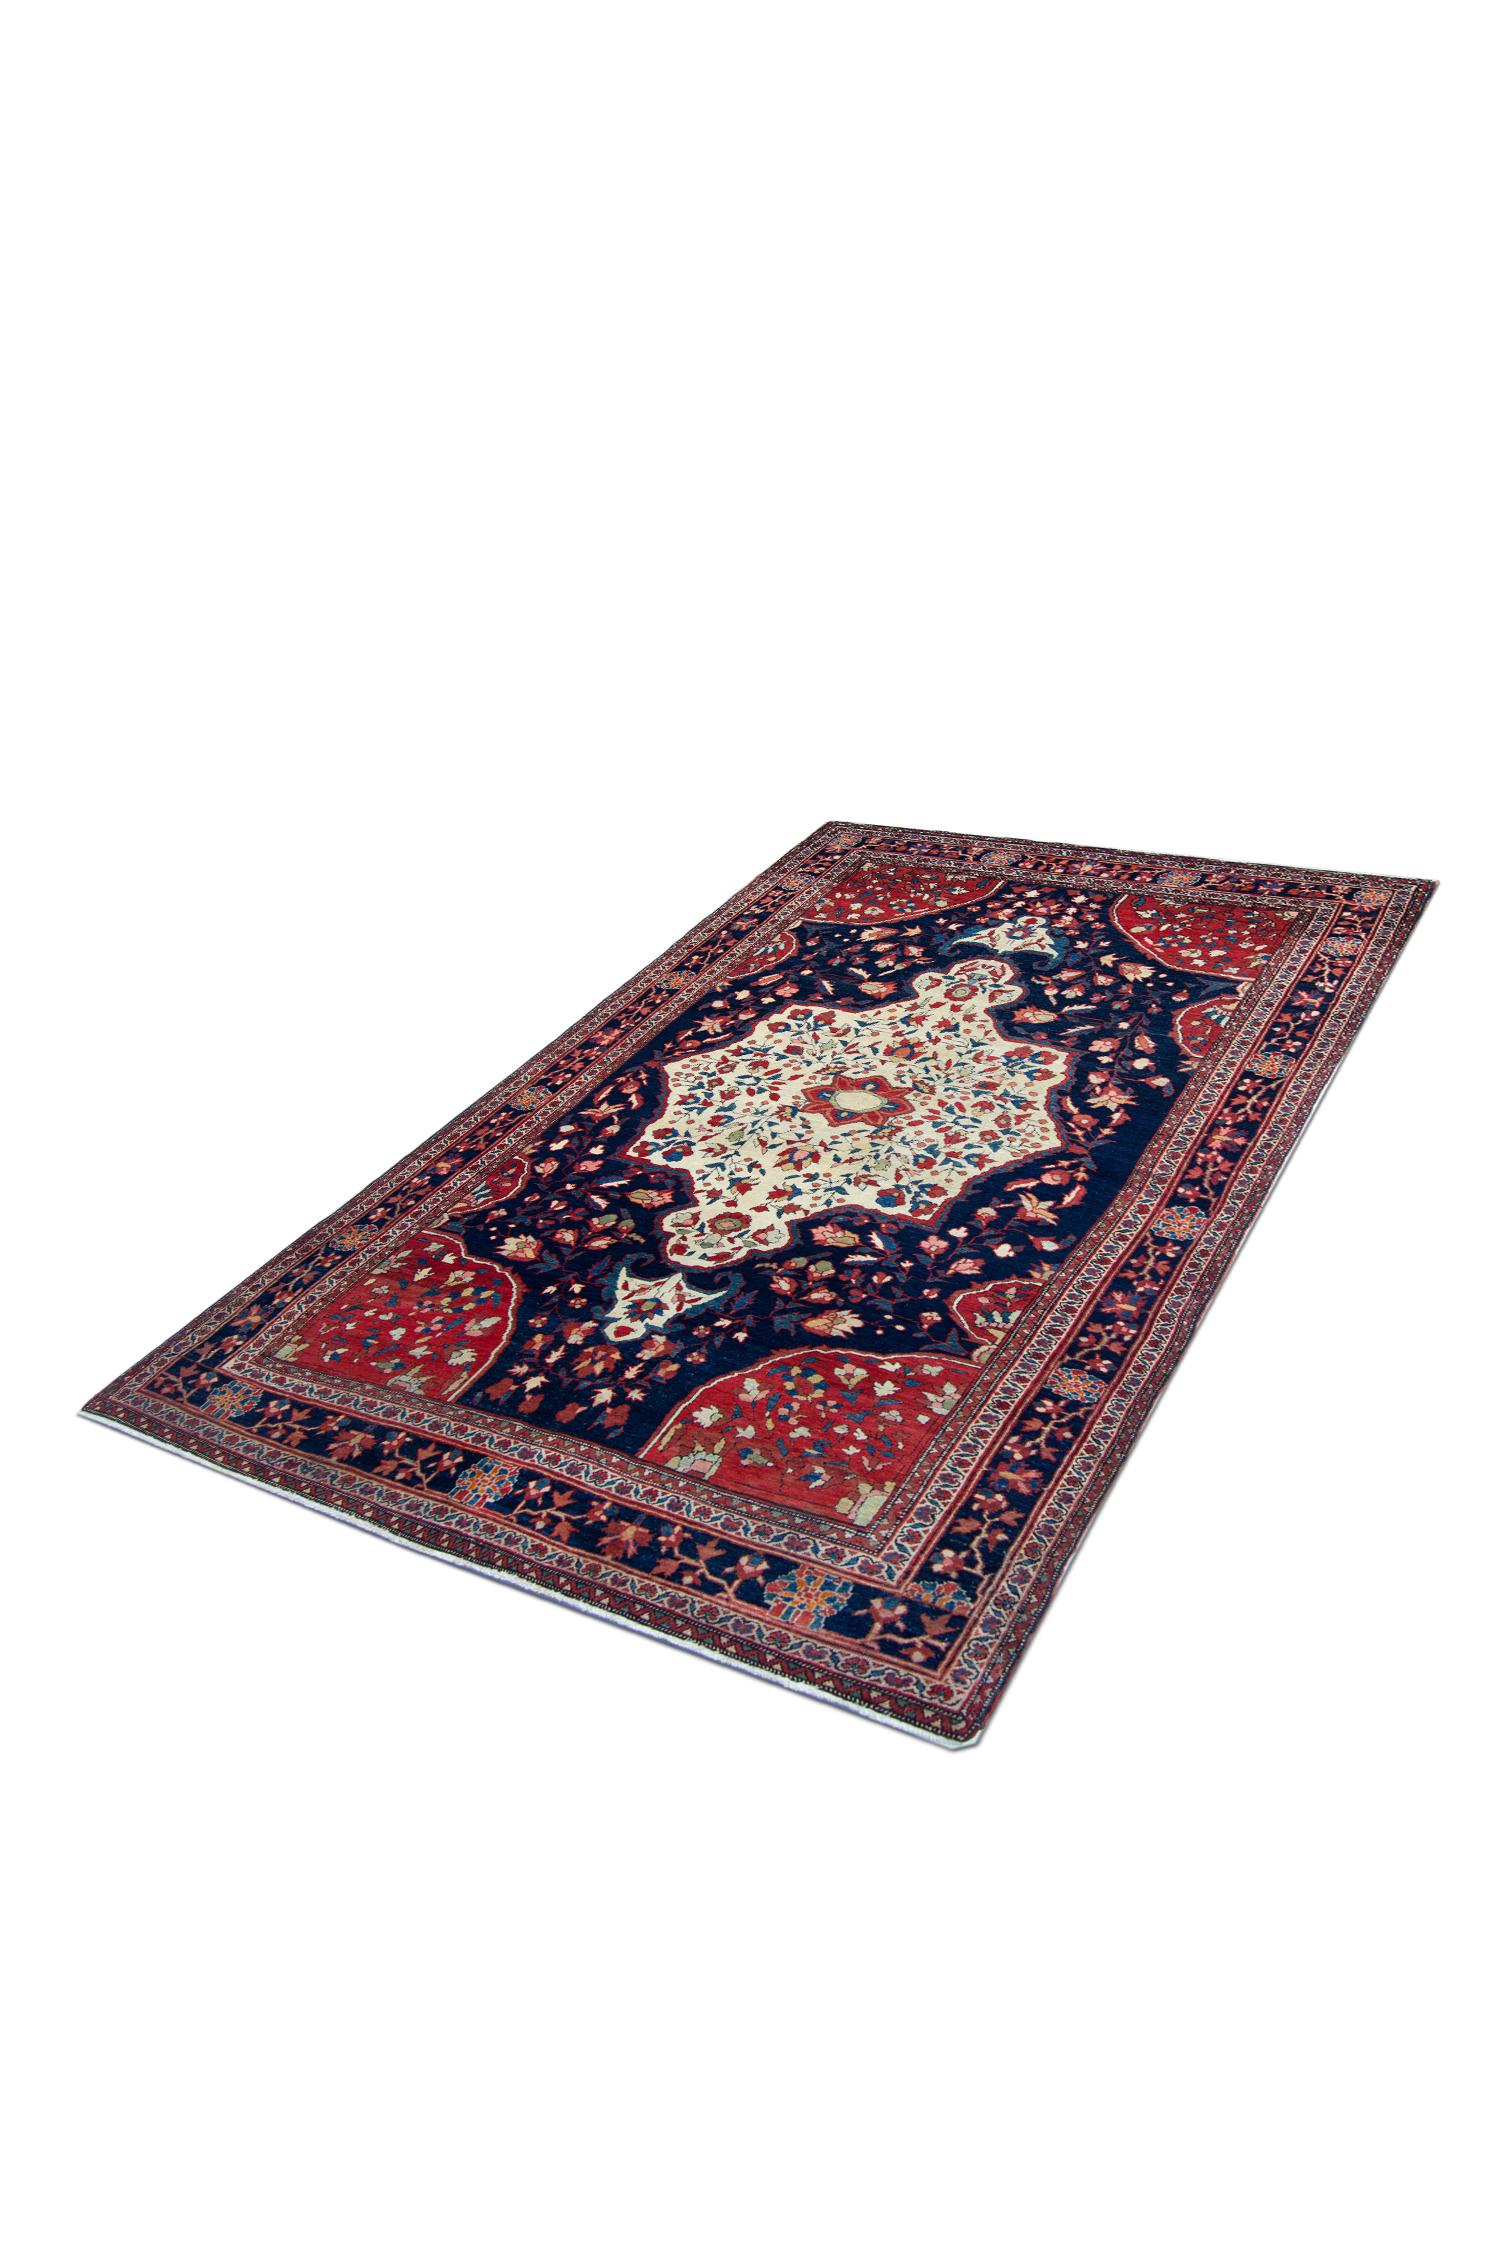 High Victorian Handmade Carpet Antique Rug Traditional Red Blue Wool Area Rug For Sale